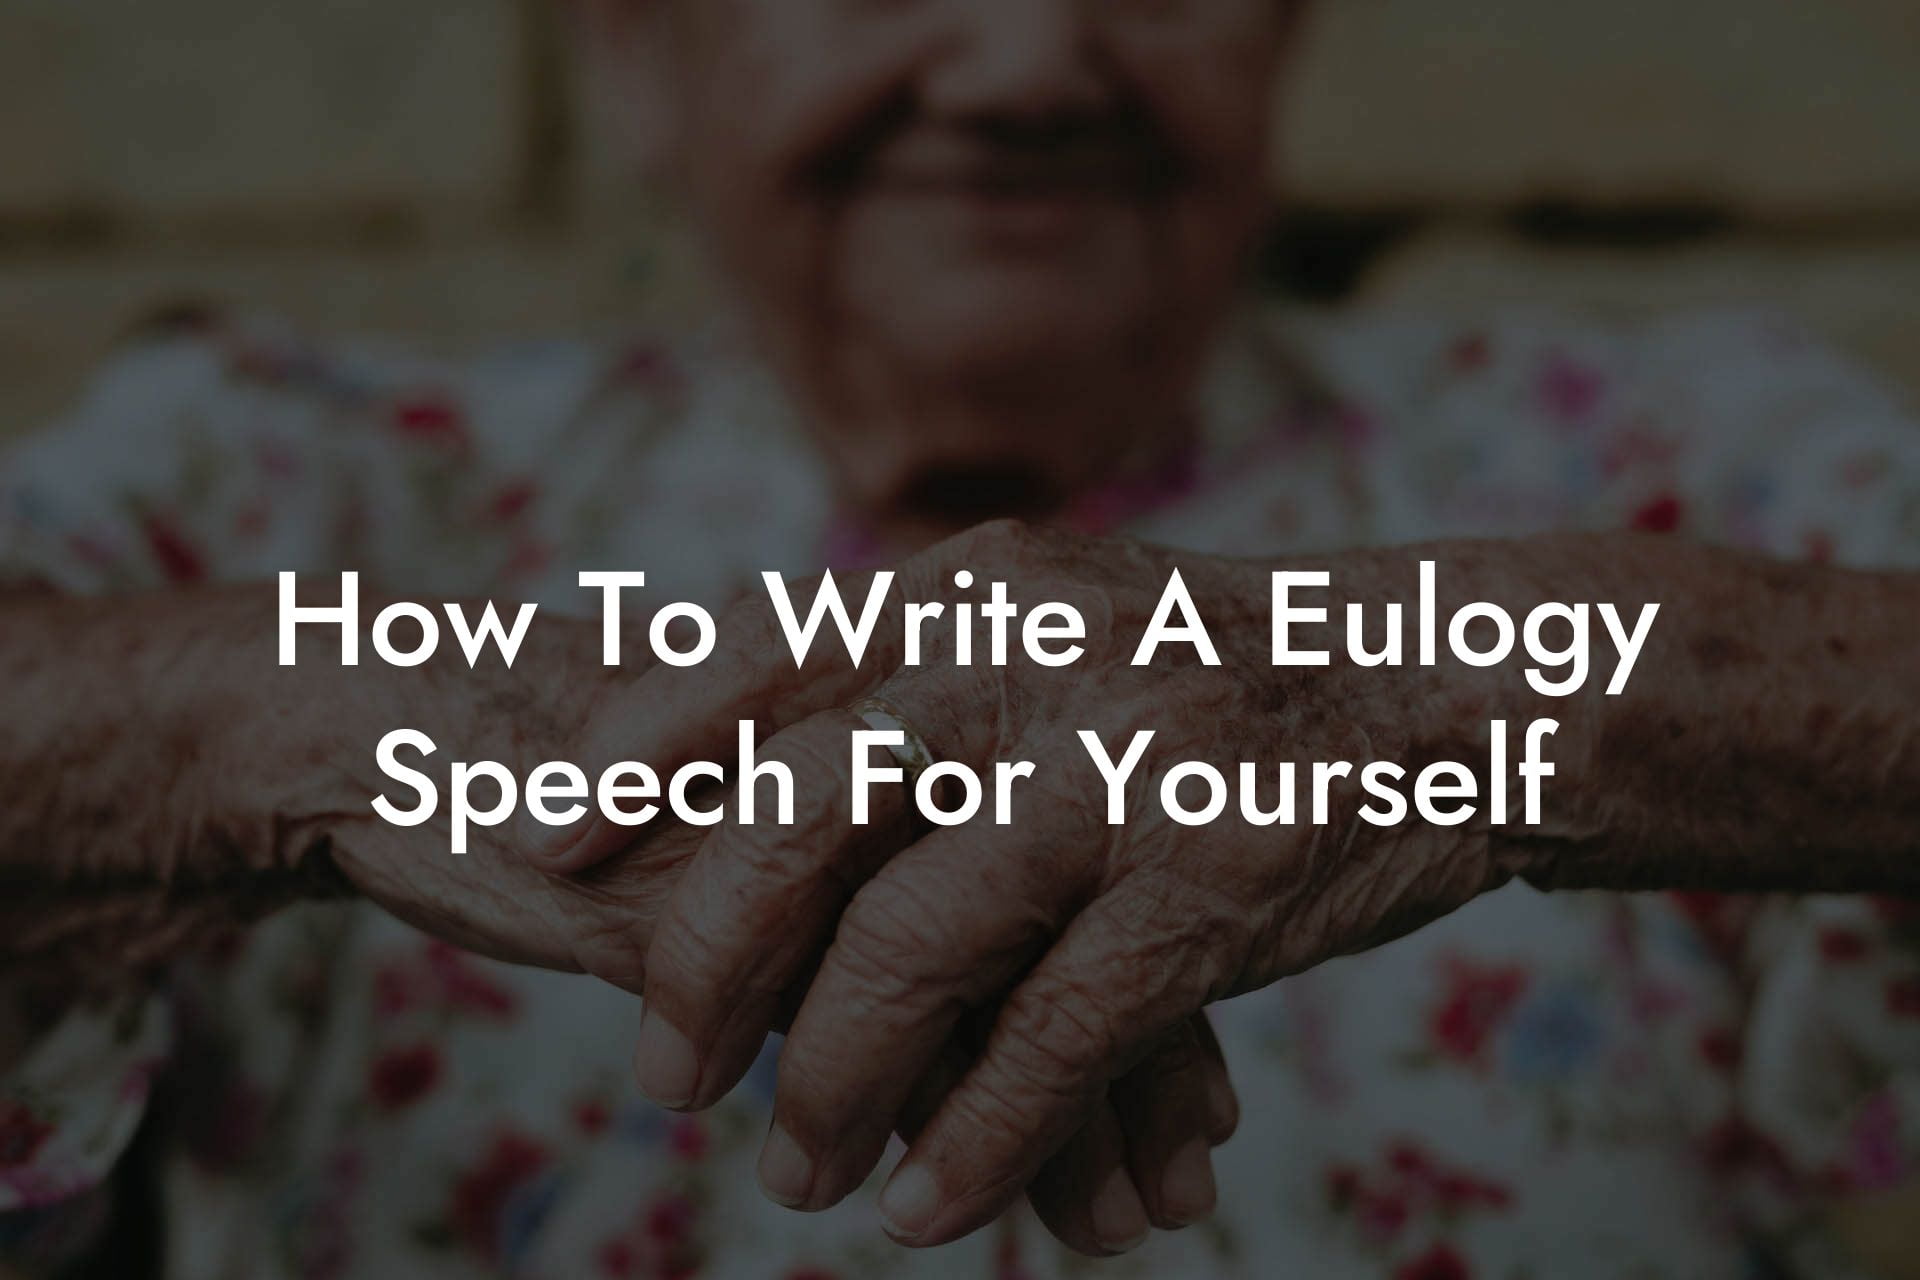 How To Write A Eulogy Speech For Yourself